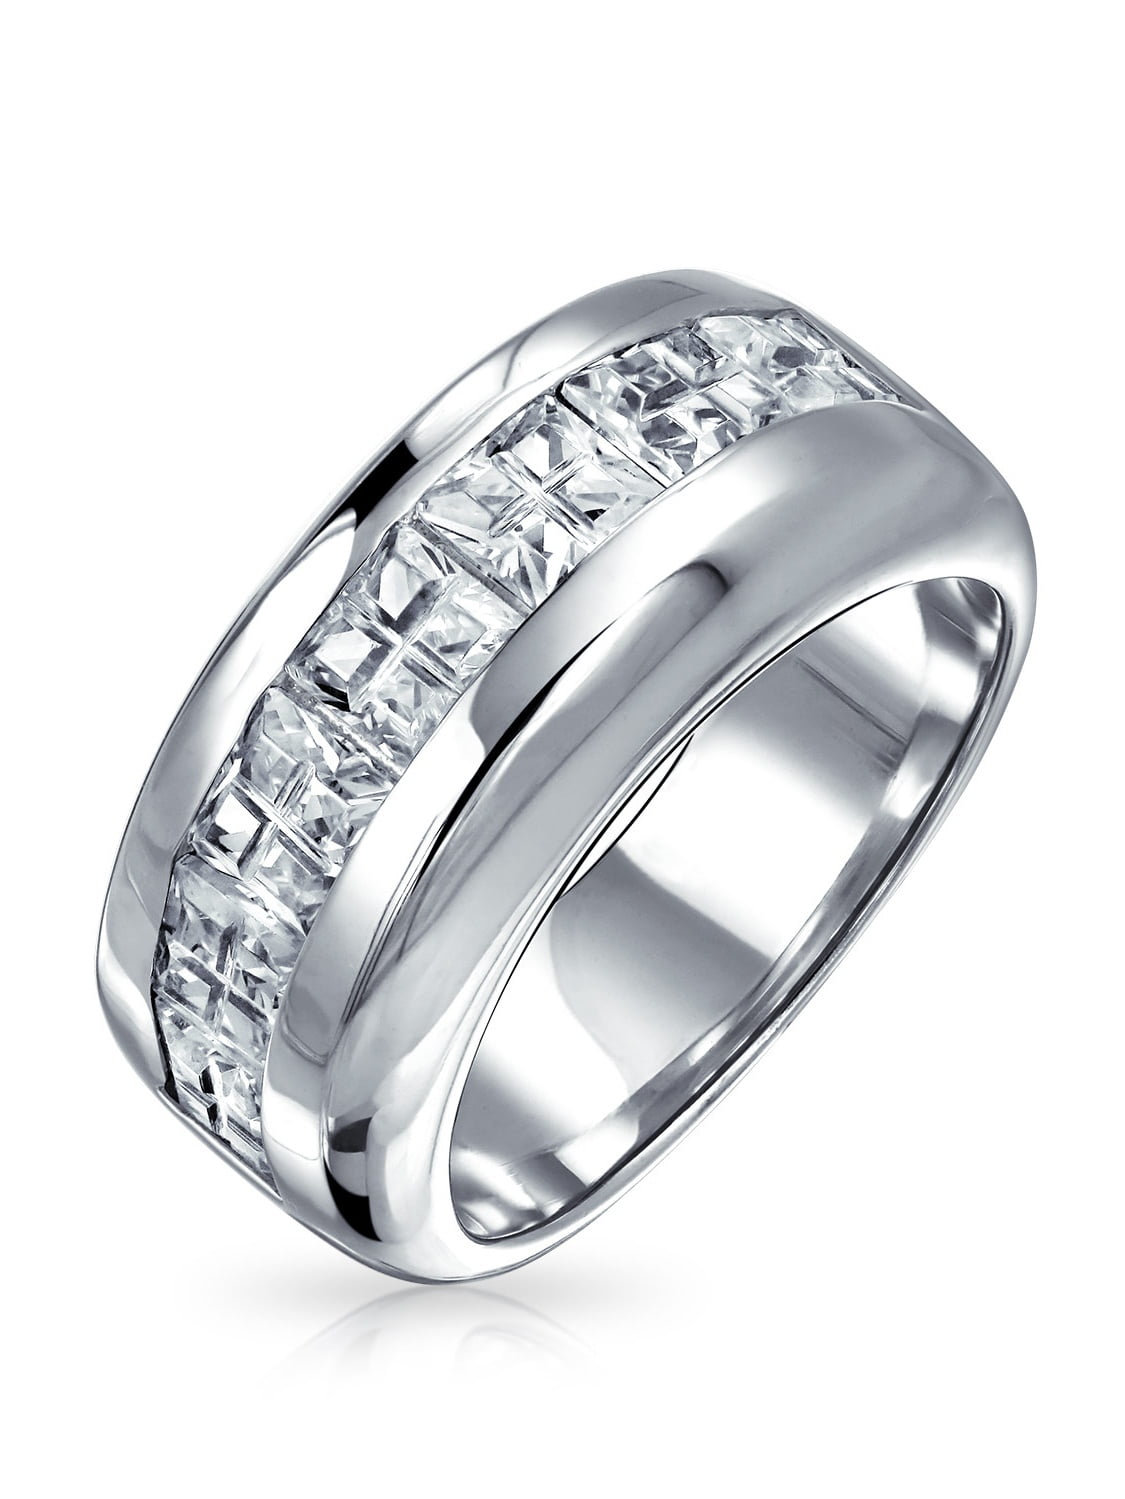 Men's Thick 10mm Round Channel Cz Stone Wedding Anniversary Ring Band 925 Silver 